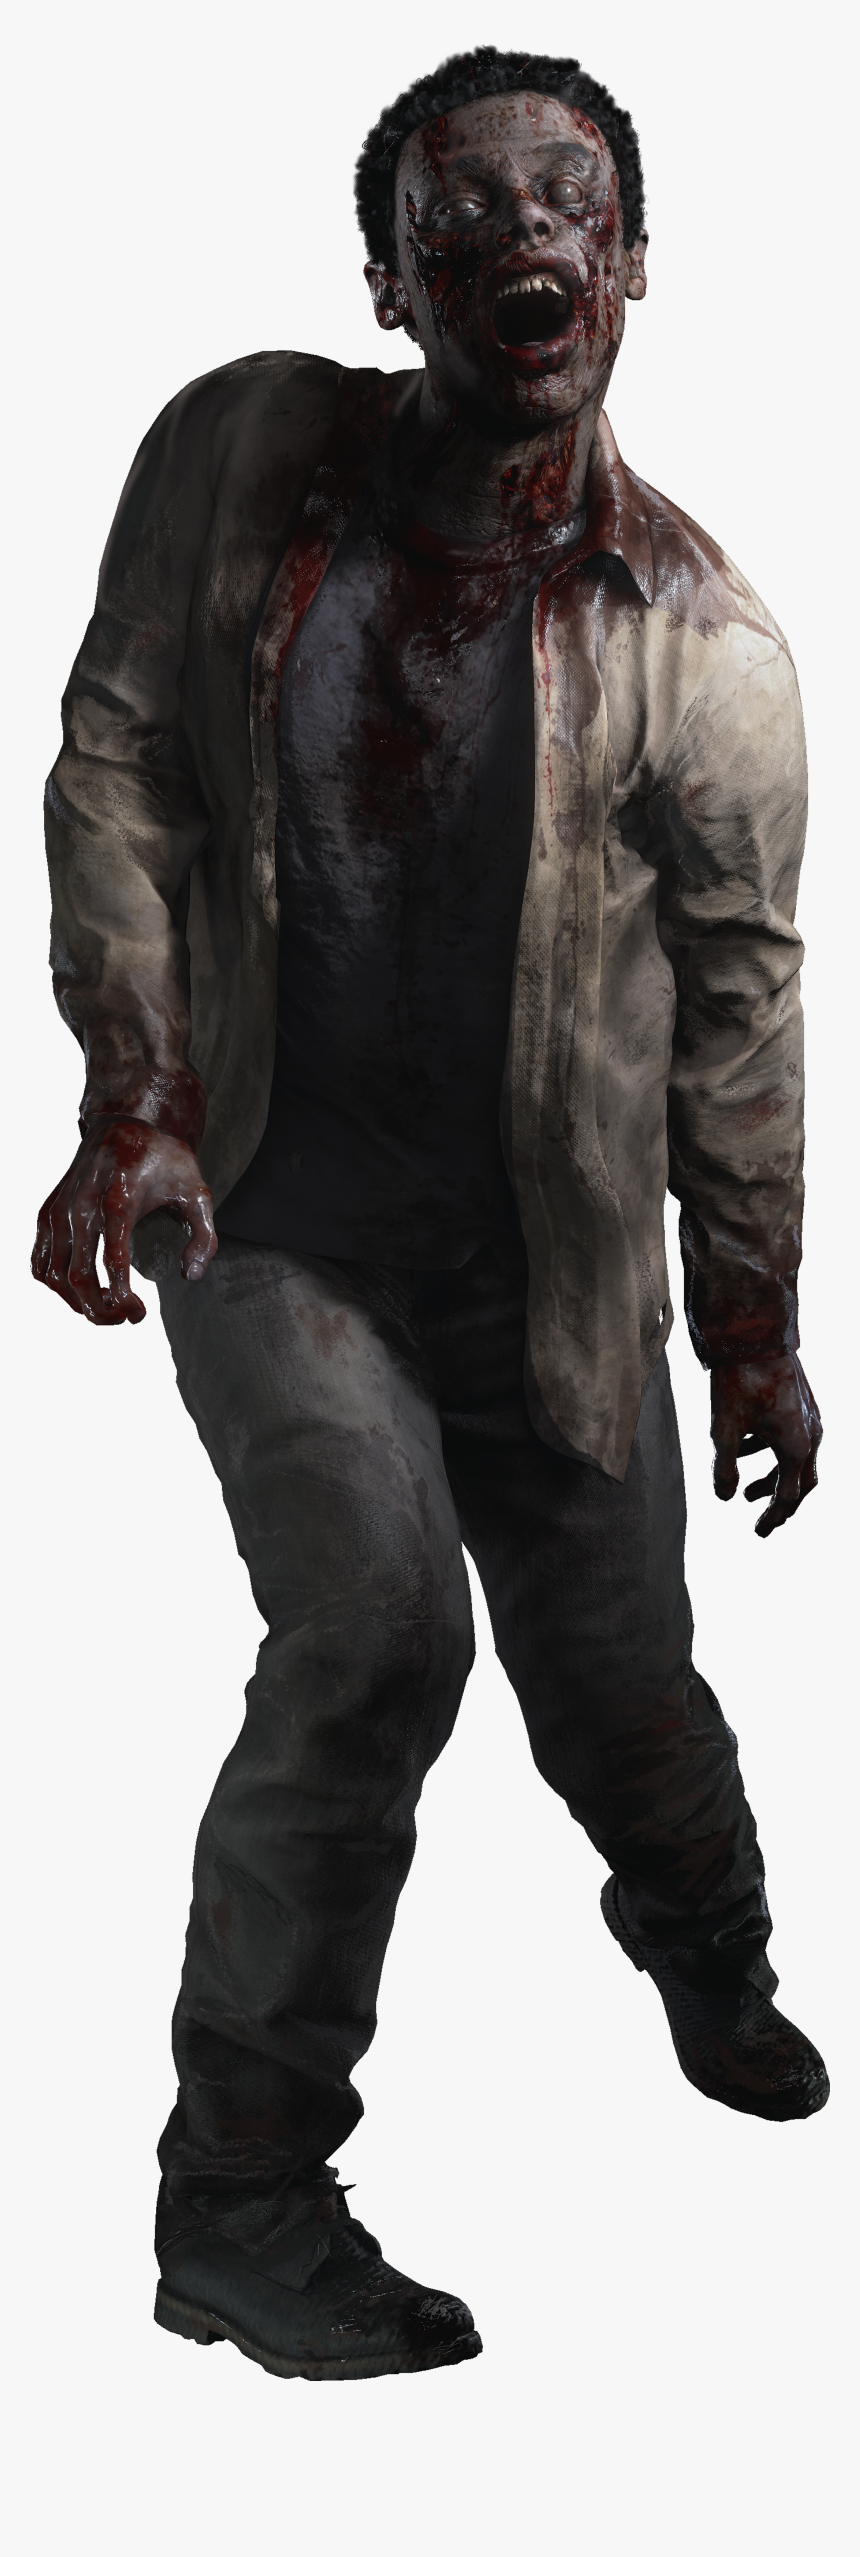 Zombie Render Png, Transparent Png, Free Download